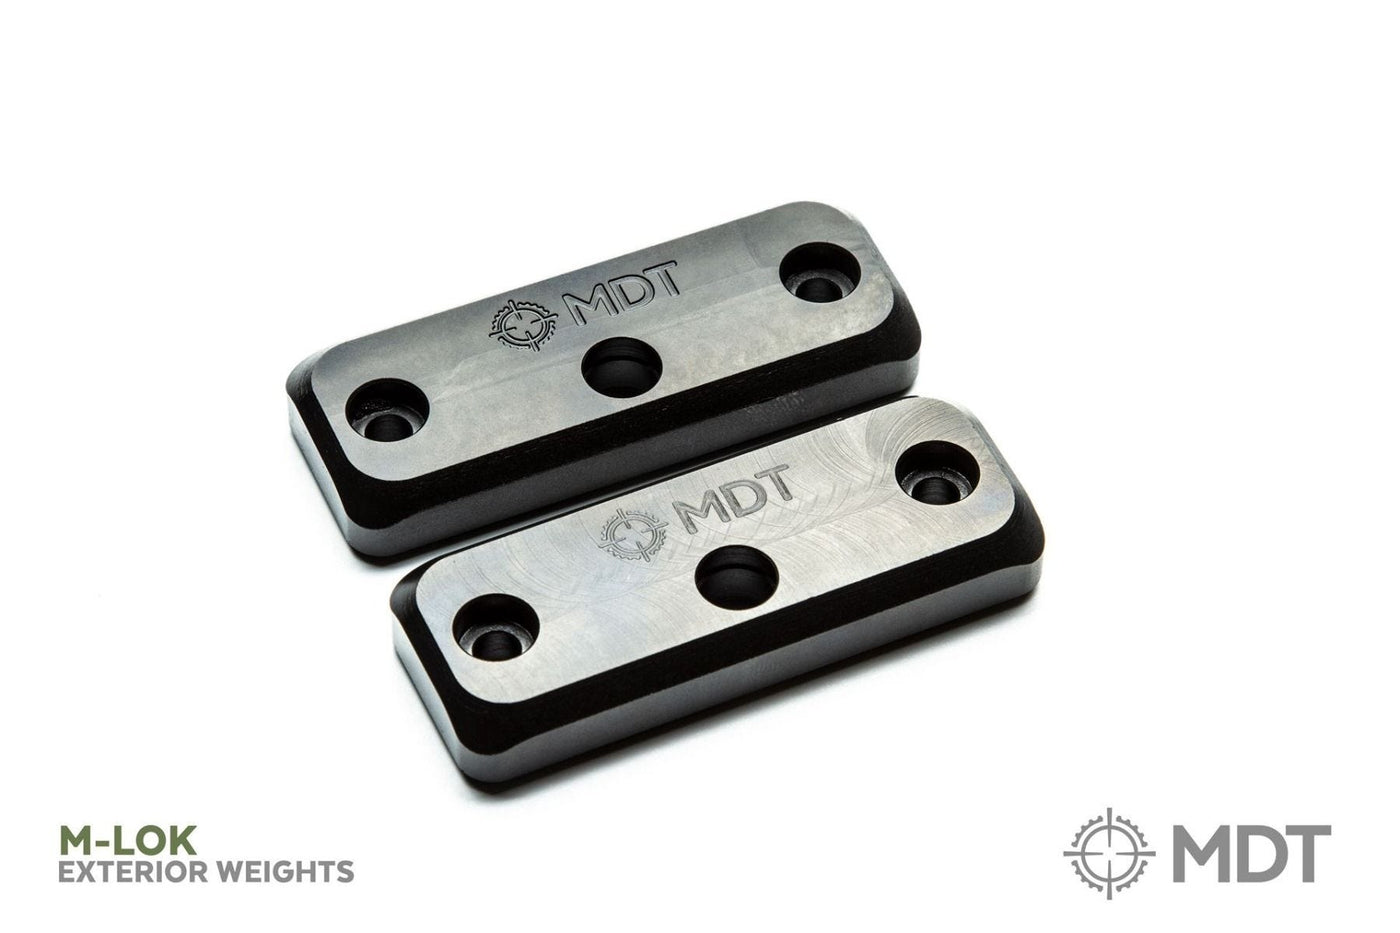 MDT ACC CHASSIS WEIGHTS - EXTERNAL FOREND (PAIR)